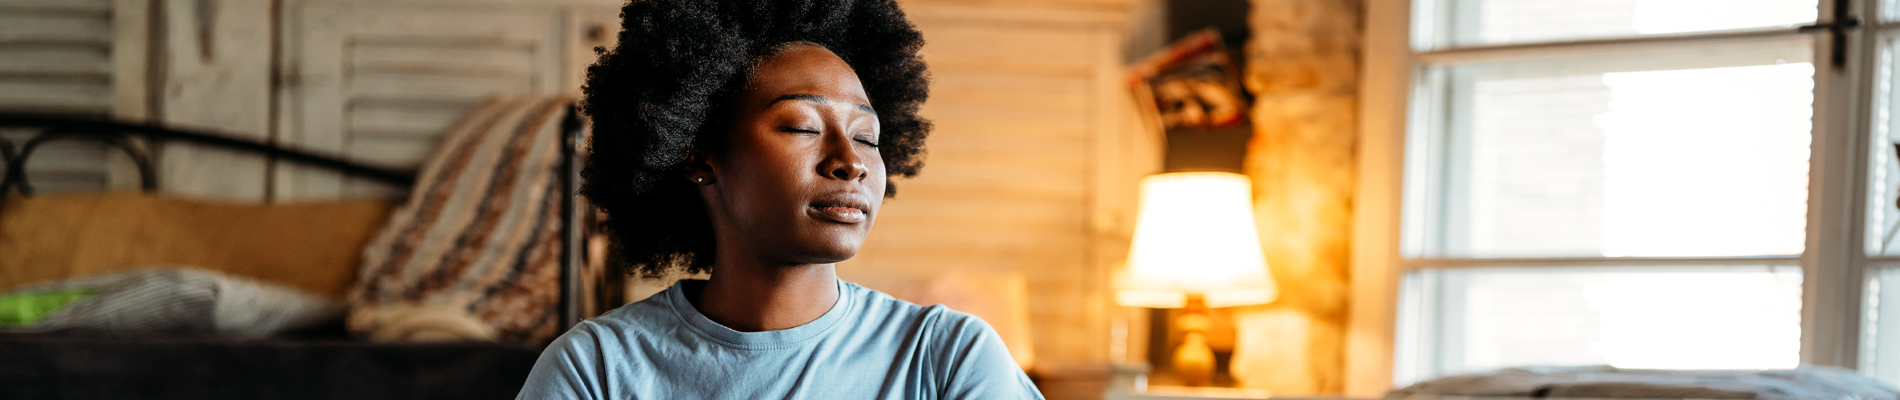 woman with eyes closed in the middle of living room in thought